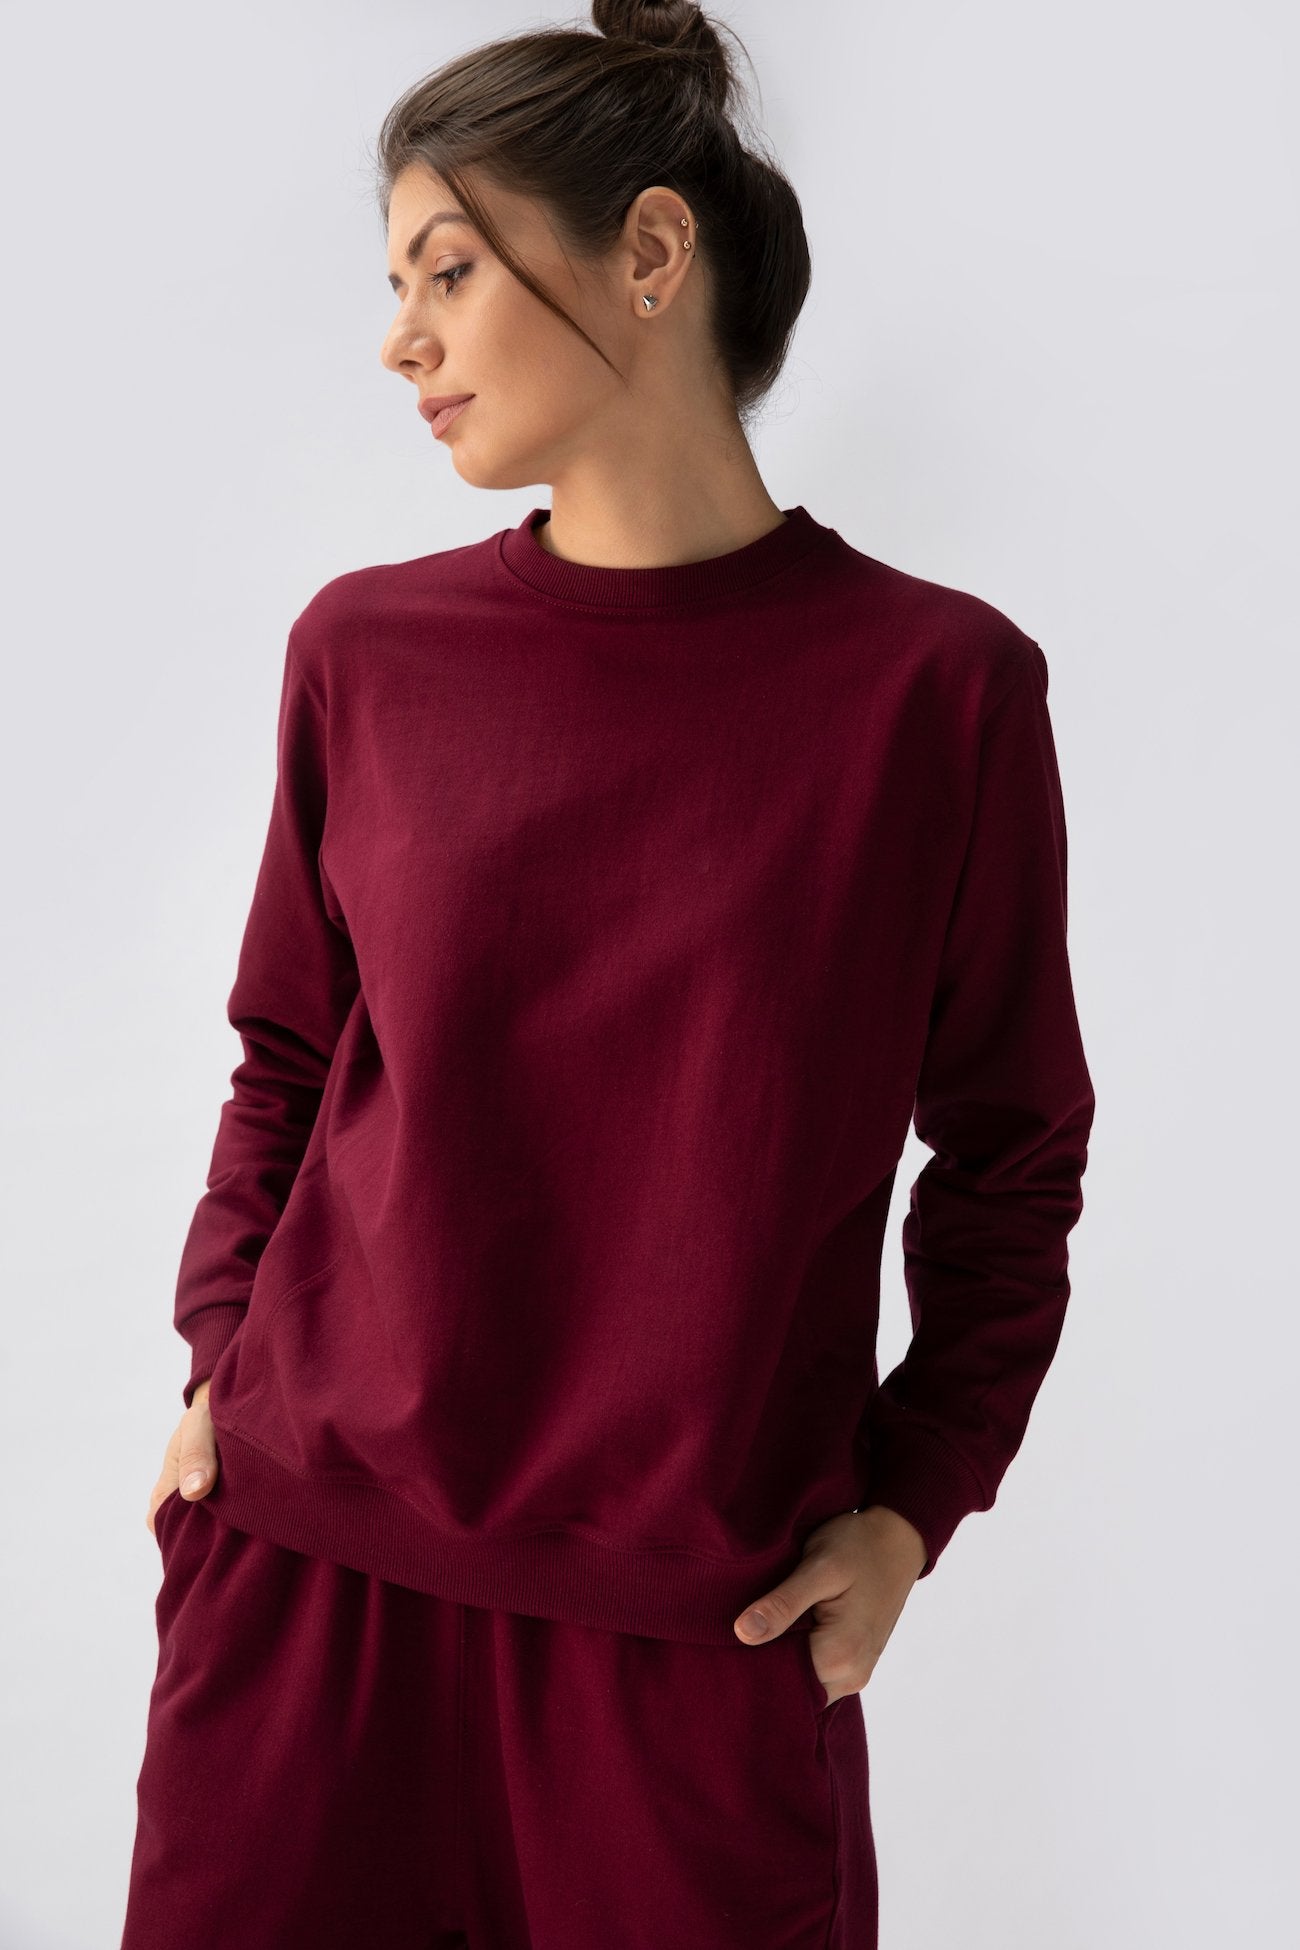 Saltpetre womens wear, lounge wear for casual wear.
  Comfortable jogger & sweatshirt co ord set in maroon colour. Made from 100% organic cotton.